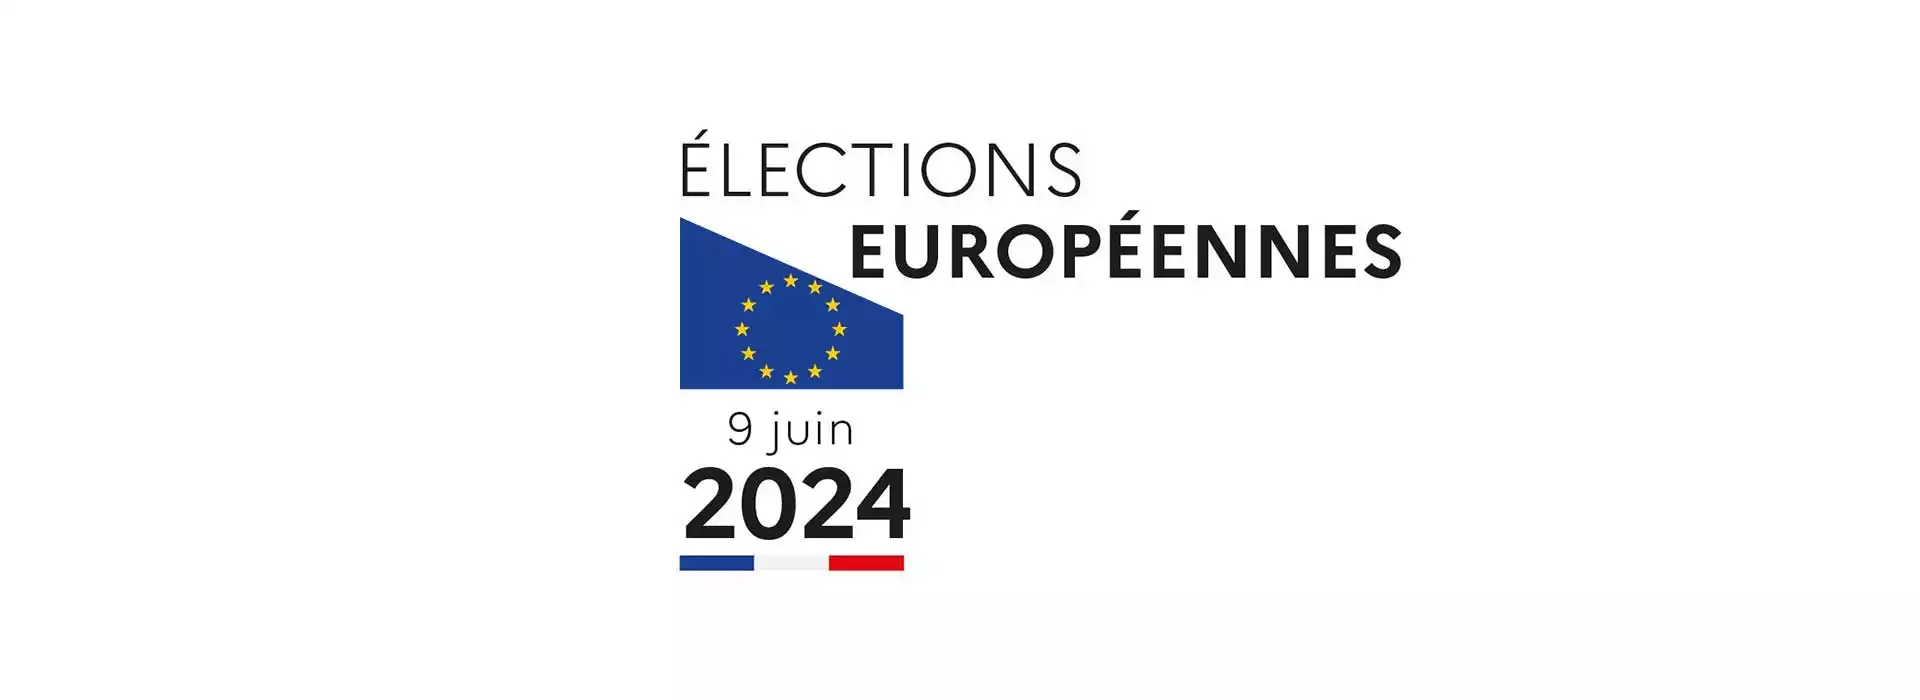 2024 Election Europennes